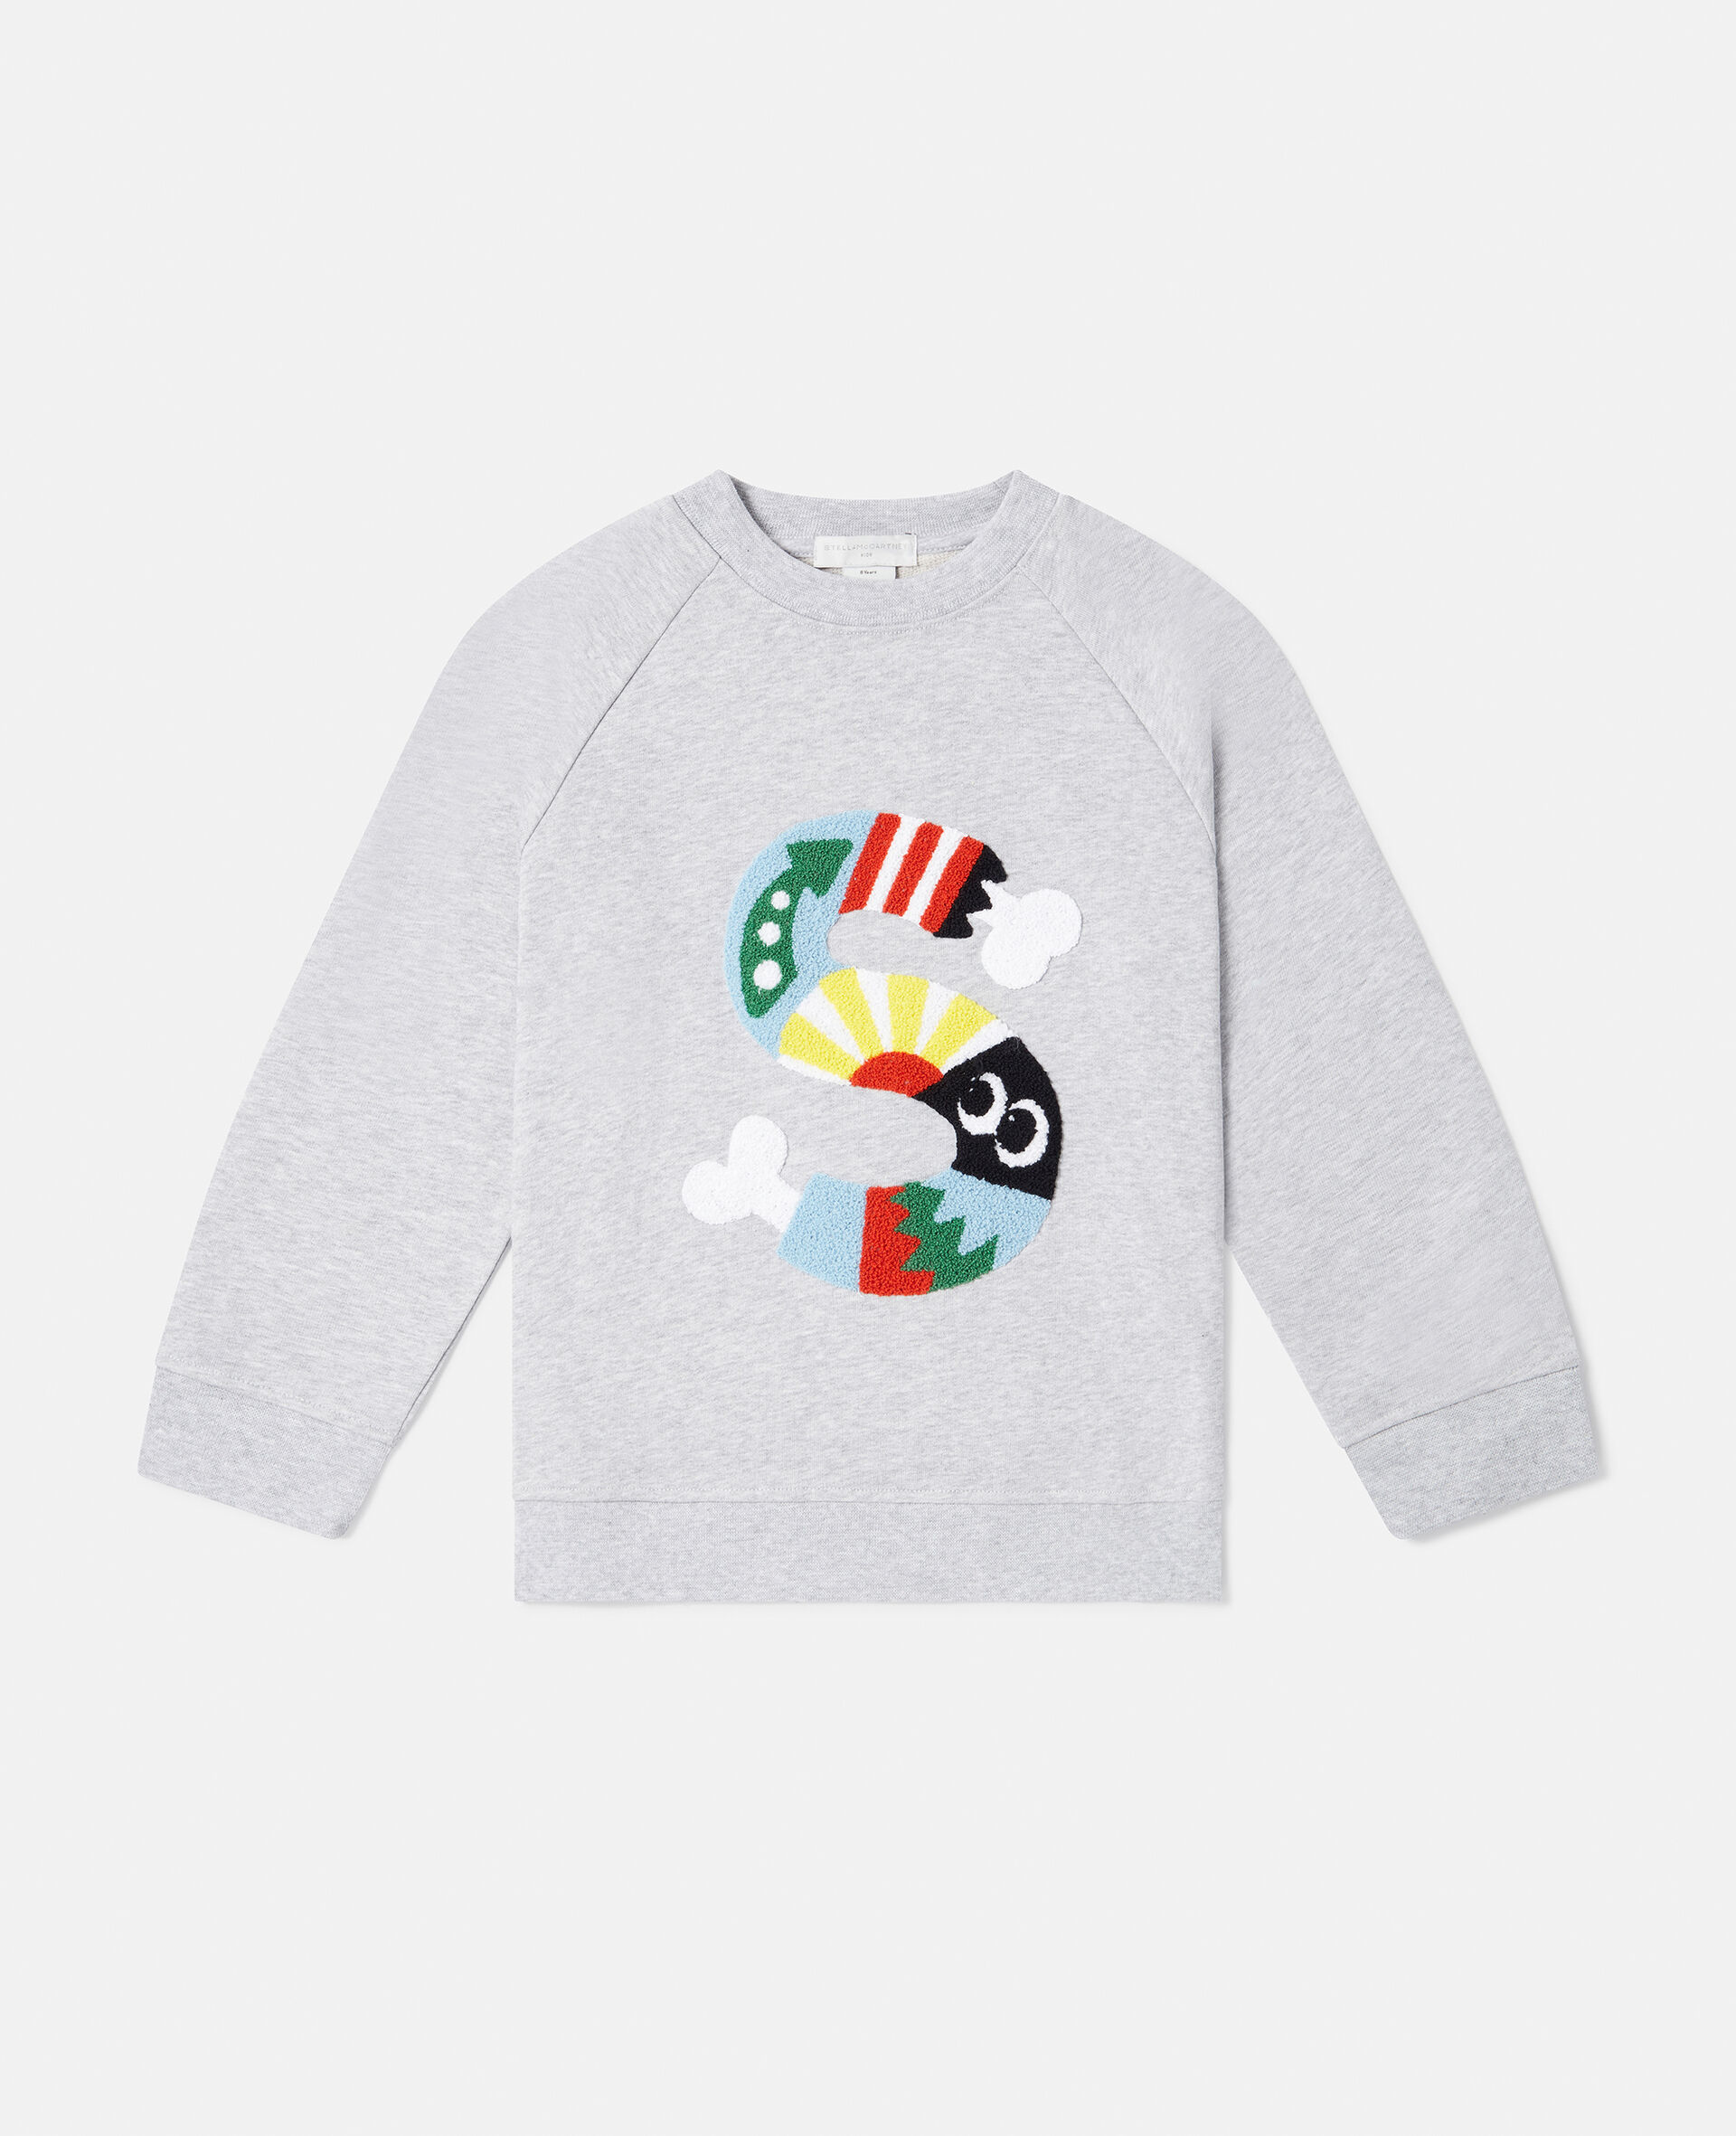 'S' Patchwork Embroidery Sweatshirt-Grey-large